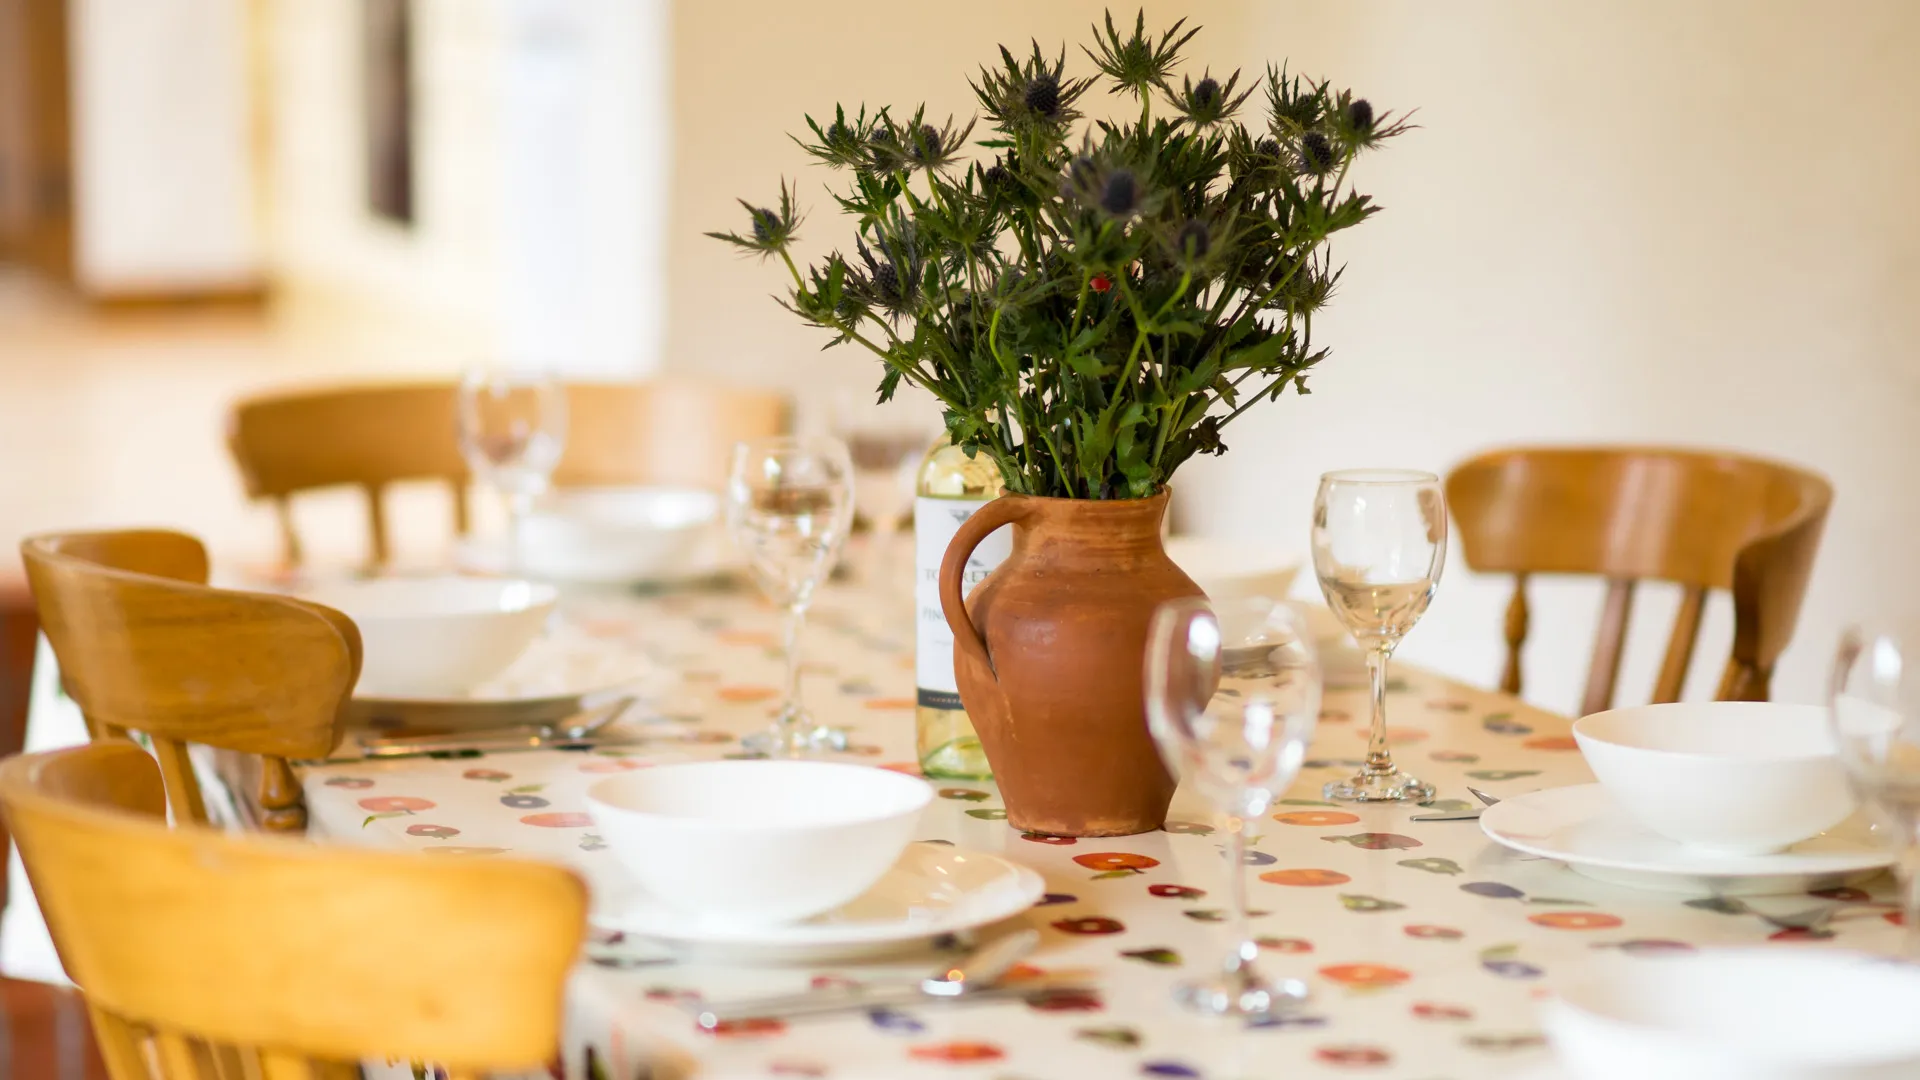 The Byre table and flowers